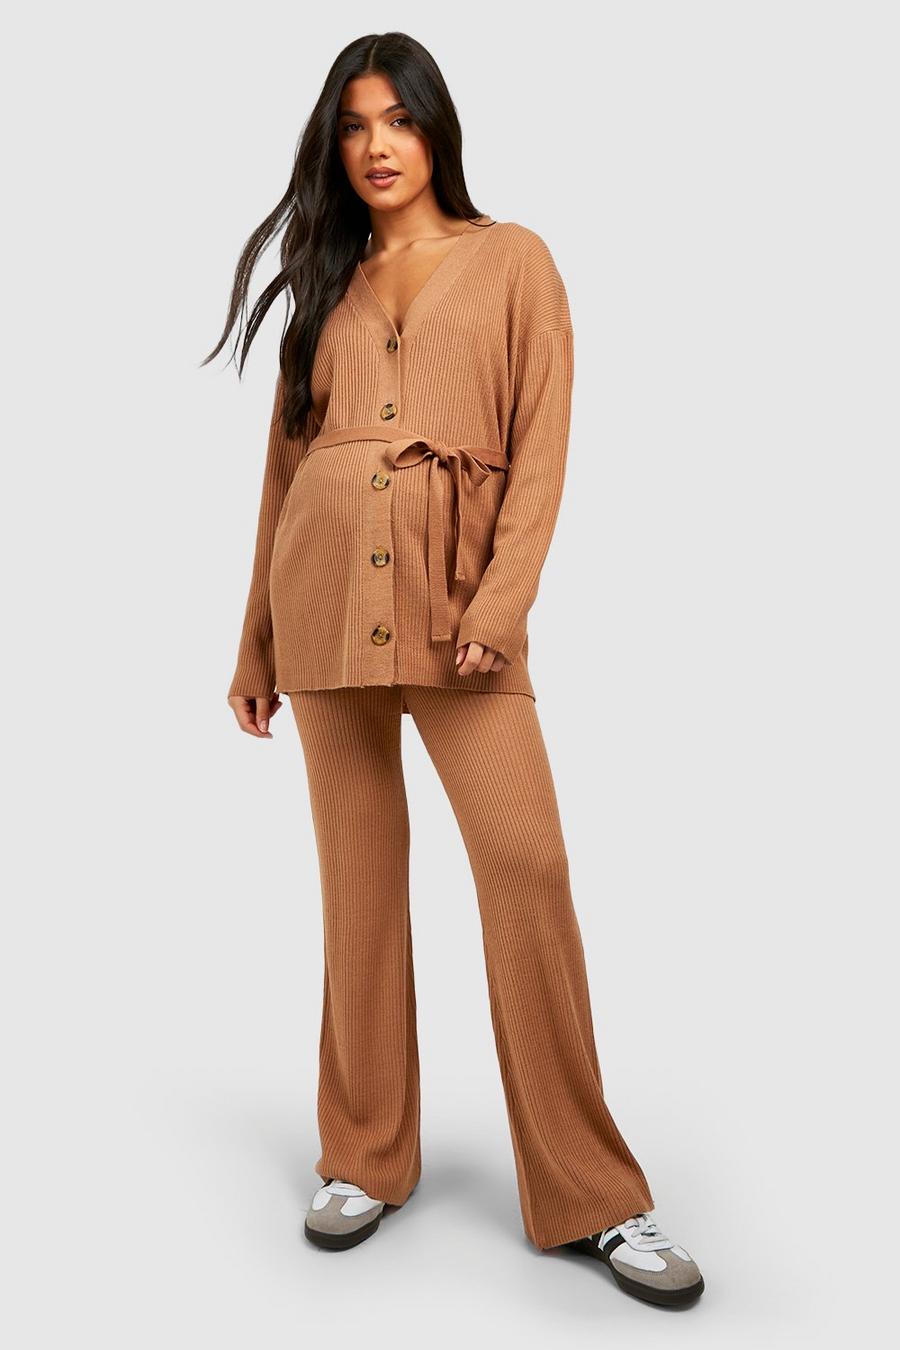 Camel beis Maternity Knitted Cardigan & Wide Leg Co-ord